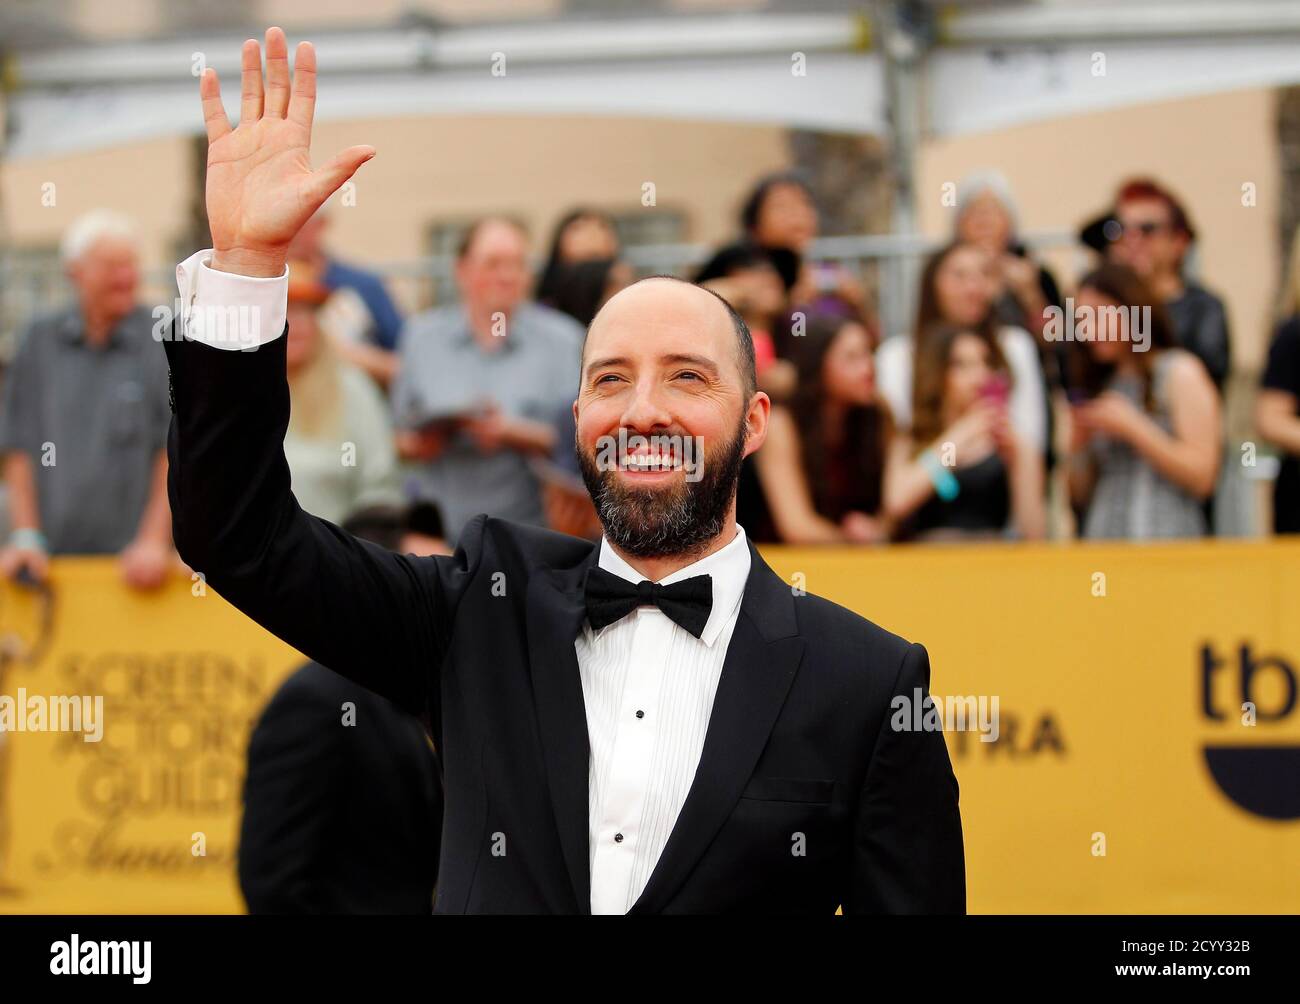 Actor Tony Hale from the HBO series 'Veep' arrives at the 21st annual Screen Actors Guild Awards in Los Angeles, California January 25, 2015.  REUTERS/Mike Blake  (UNITED STATES - Tags: ENTERTAINMENT) (SAGAWARDS-ARRIVALS) Stock Photo